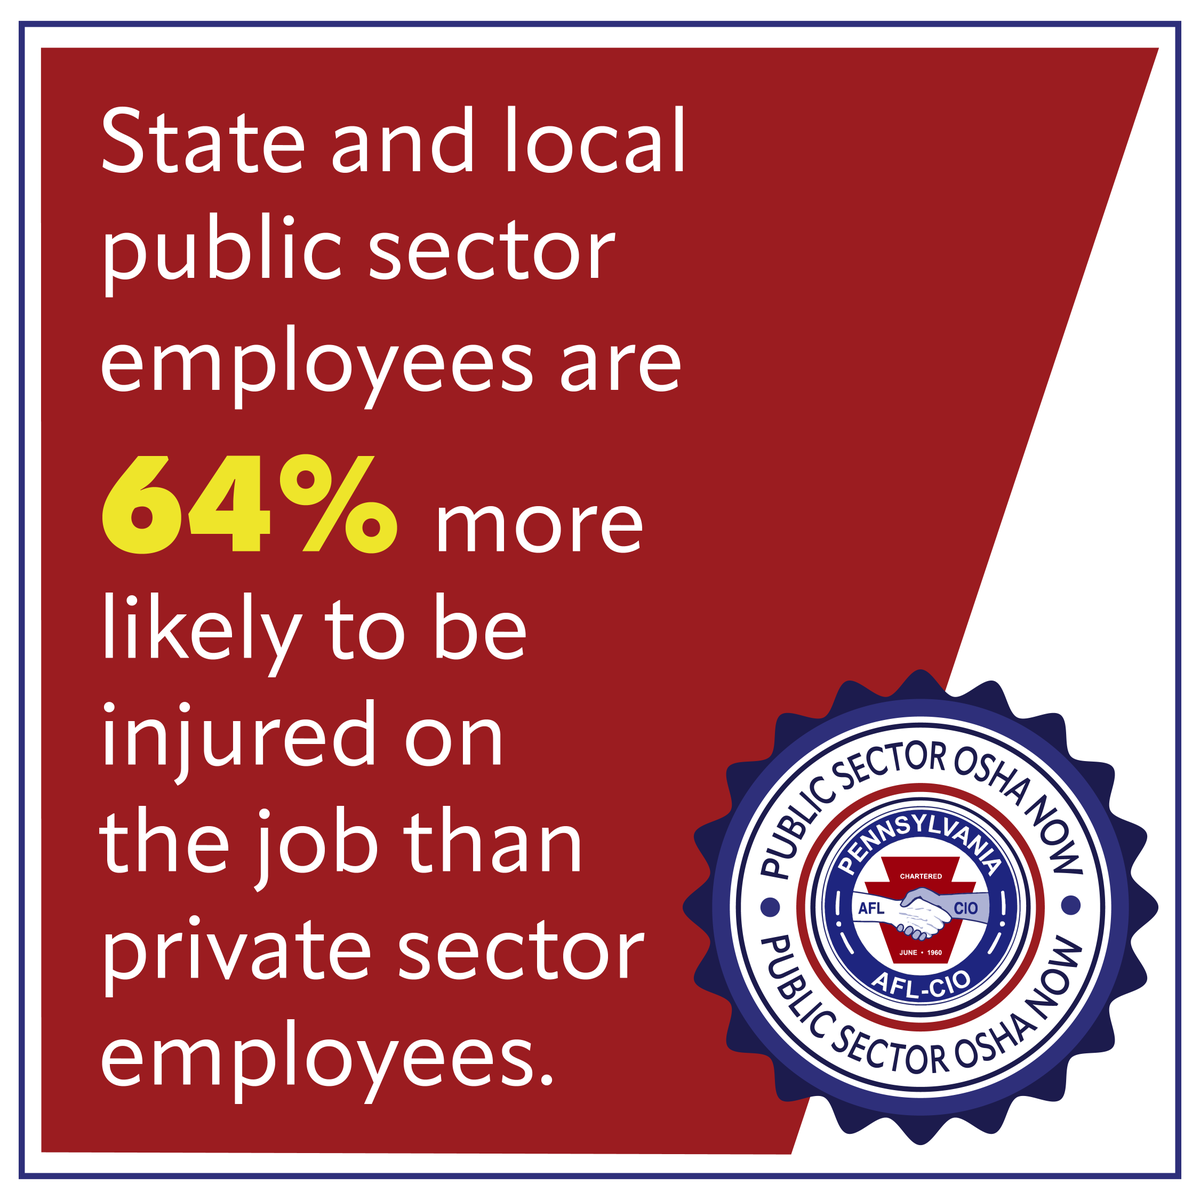 Police officers, firemen, corrections officers, road maintenance workers, and other public employees in Pennsylvania deserve the same workplace protections provided to private sector workers under OSHA. #PublicSectorOSHA #PAAFLCIO